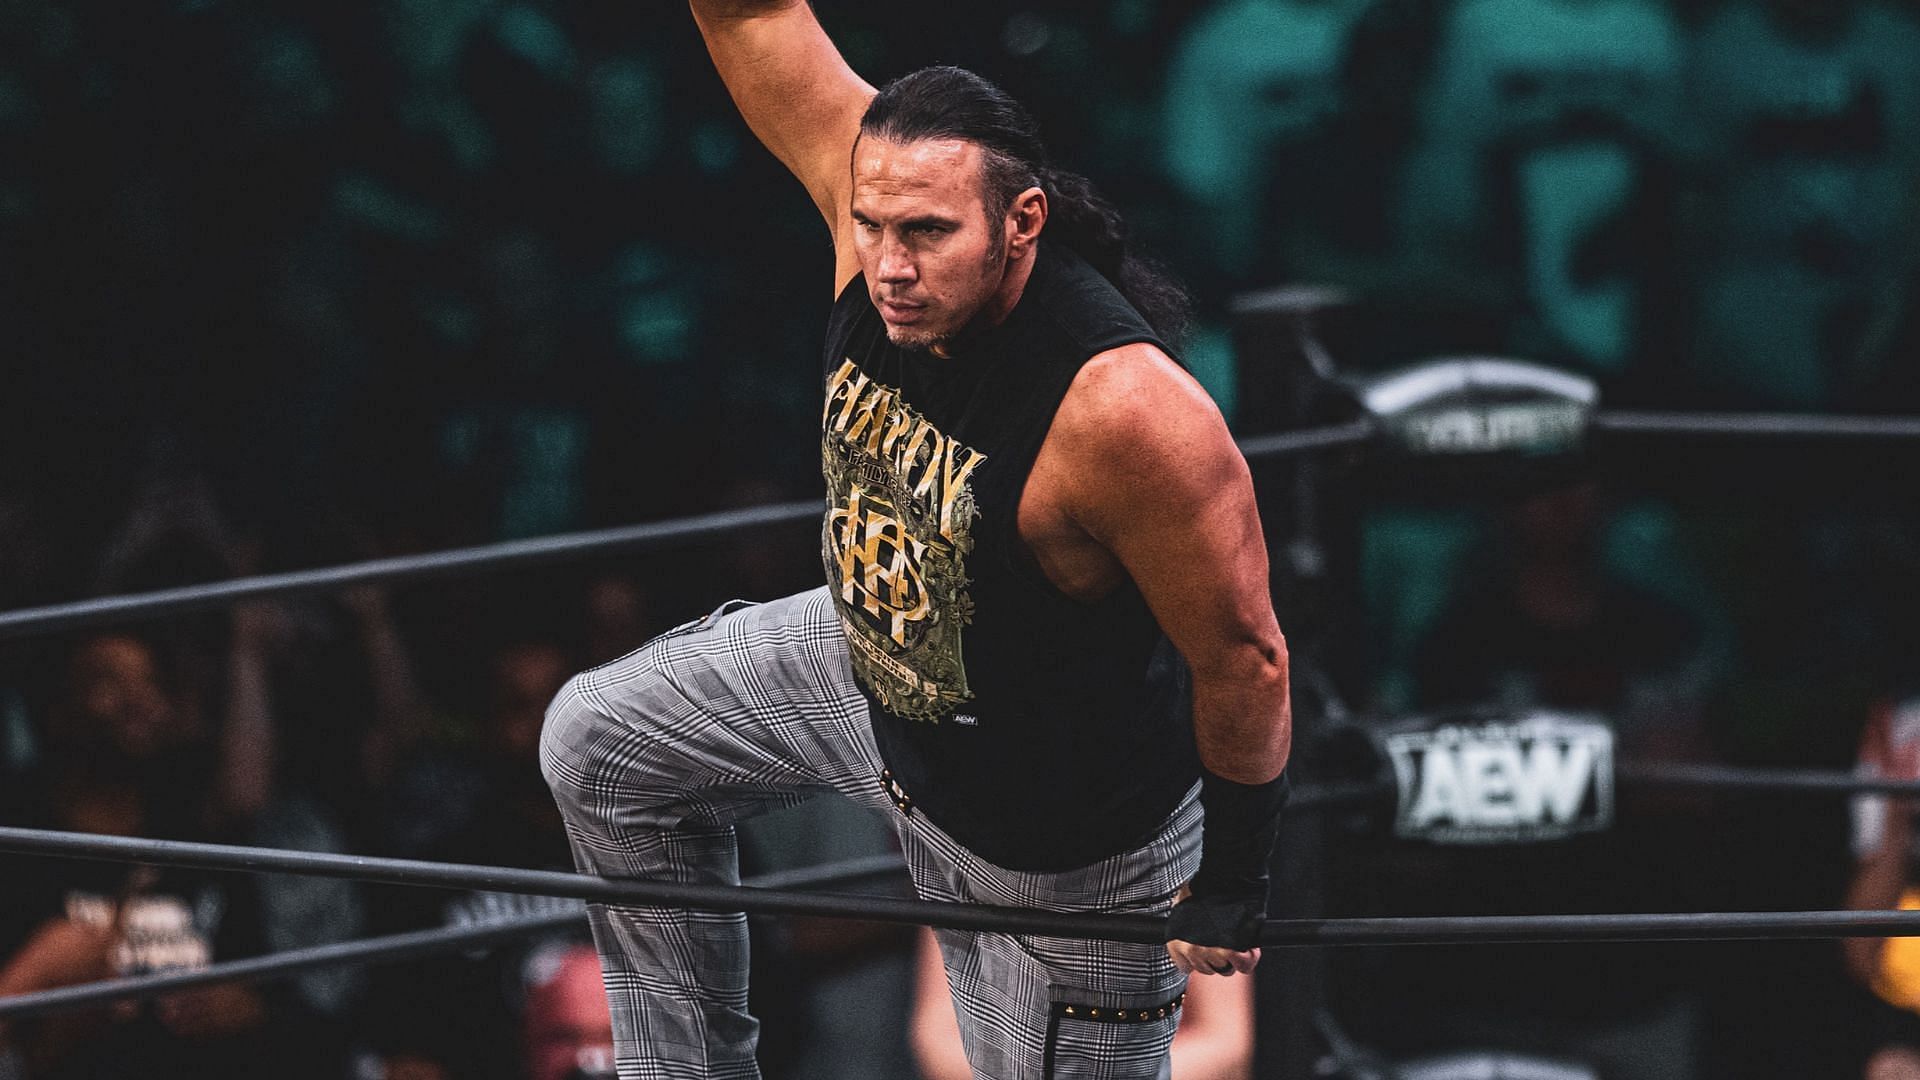 Matt Hardy has been teaming up with his brother lately